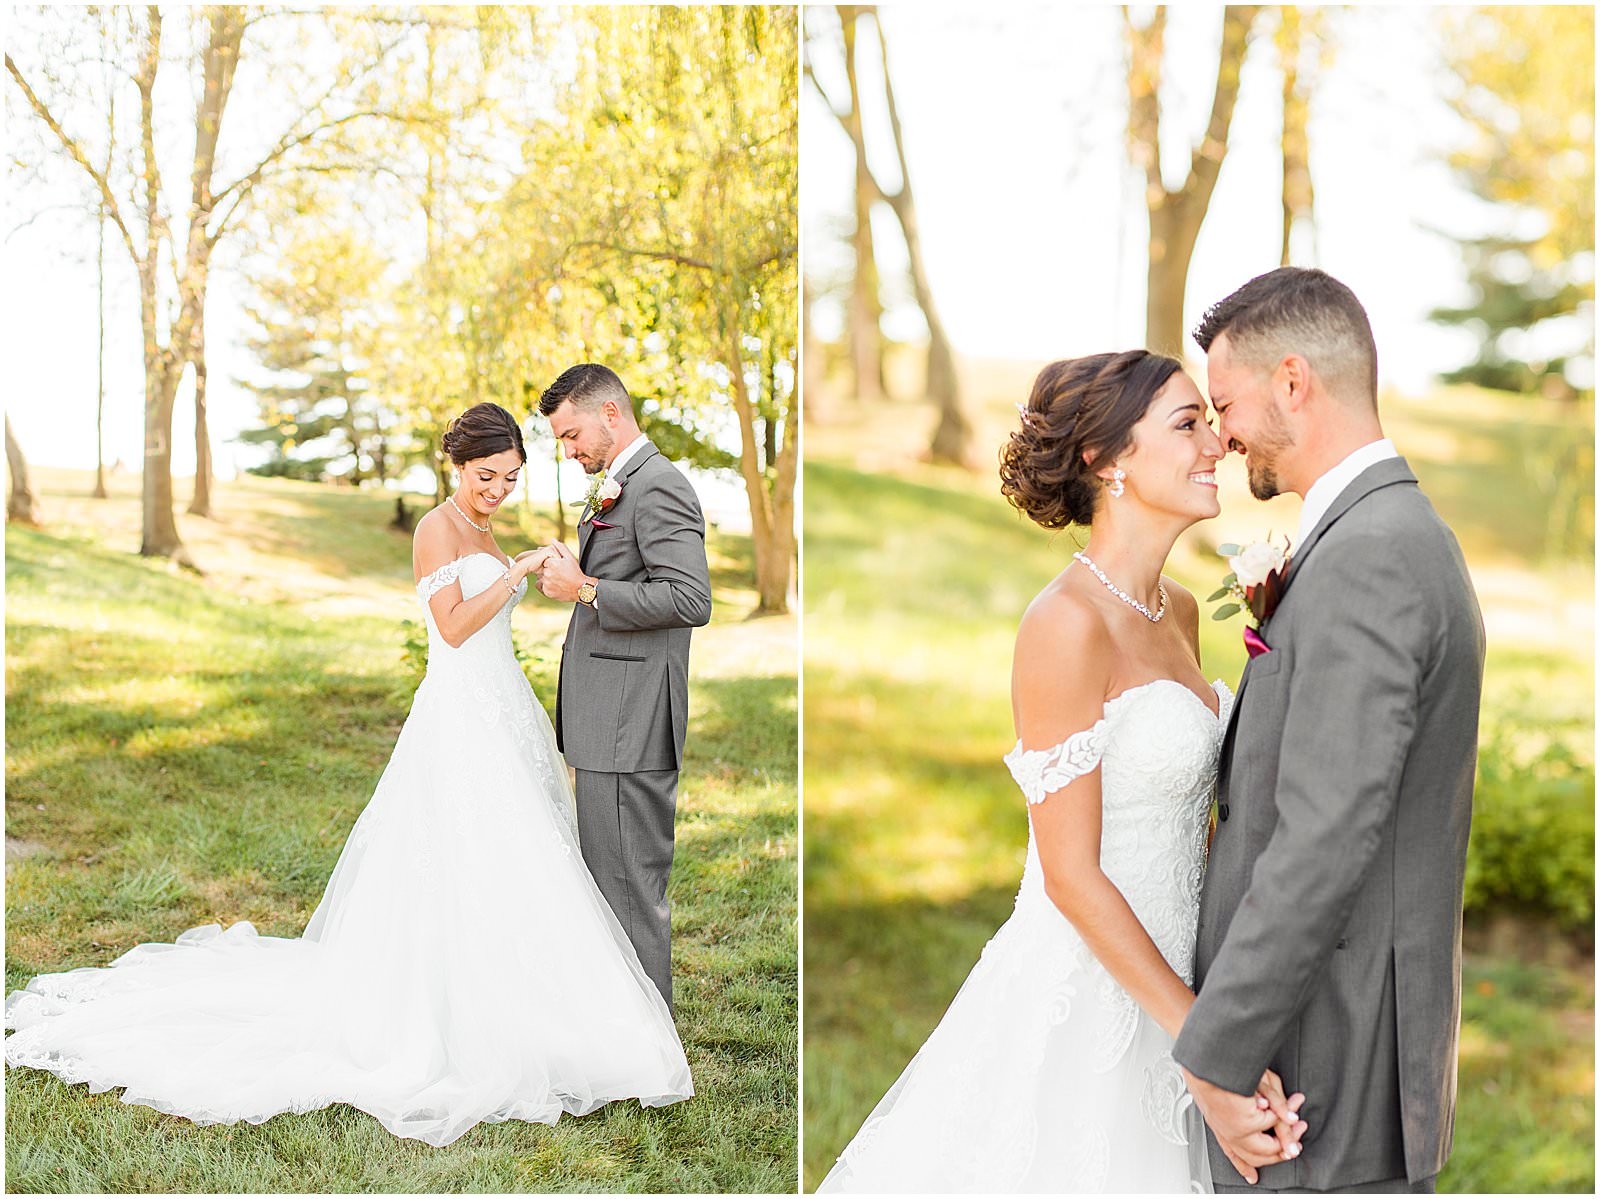 A Stunning Fall Wedding in Indianapolis, IN |. Sally and Andrew | Bret and Brandie Photography 0052.jpg